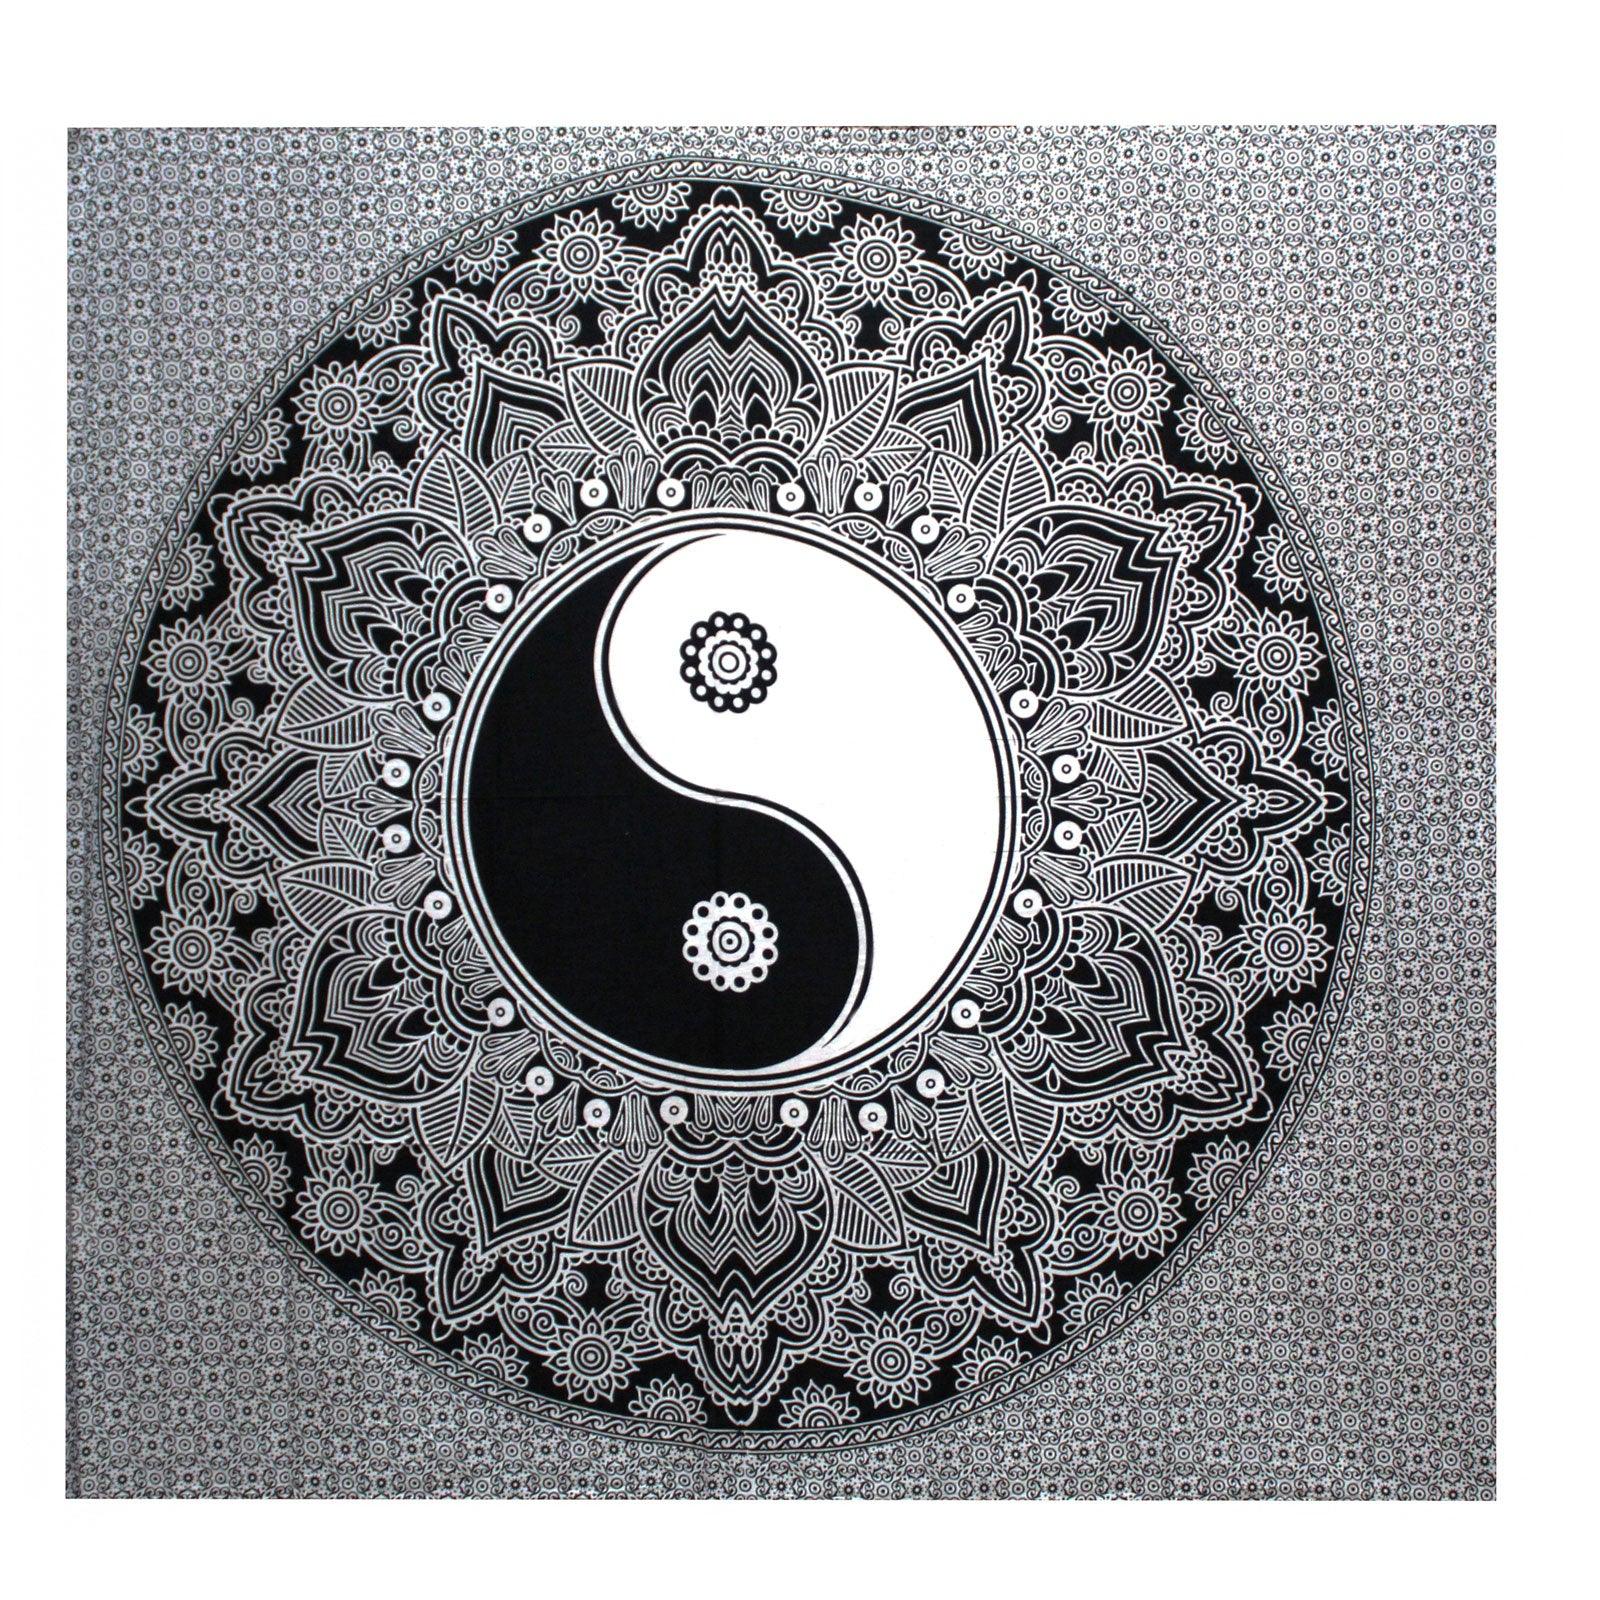 Double Cotton Bedspread + Wall Hanging - Ying Yang - Black and White - Charming Spaces